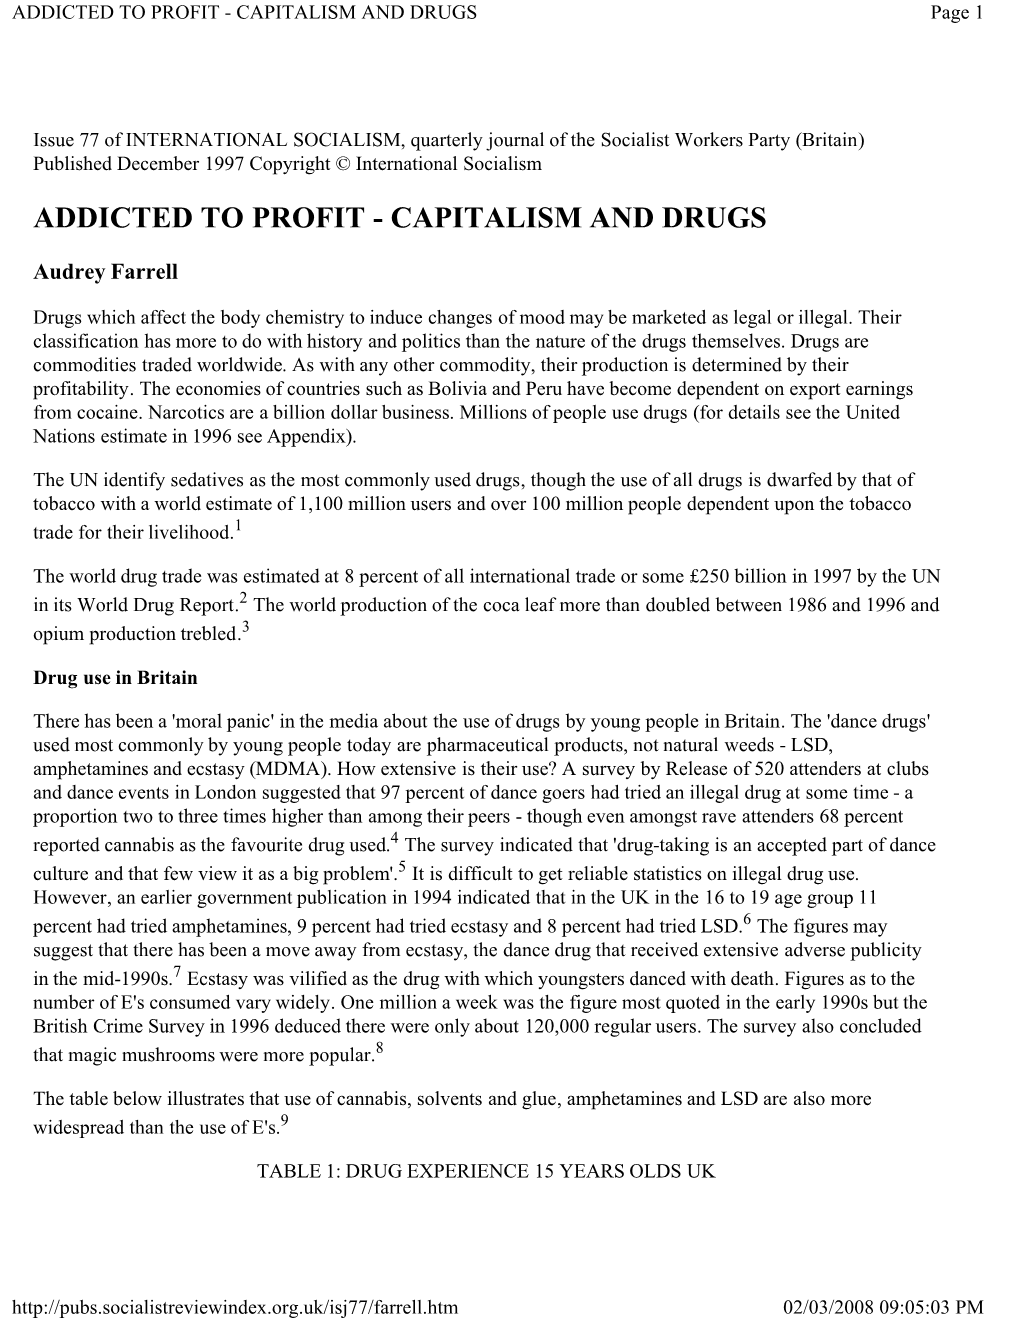 ADDICTED to PROFIT - CAPITALISM and DRUGS Page 1